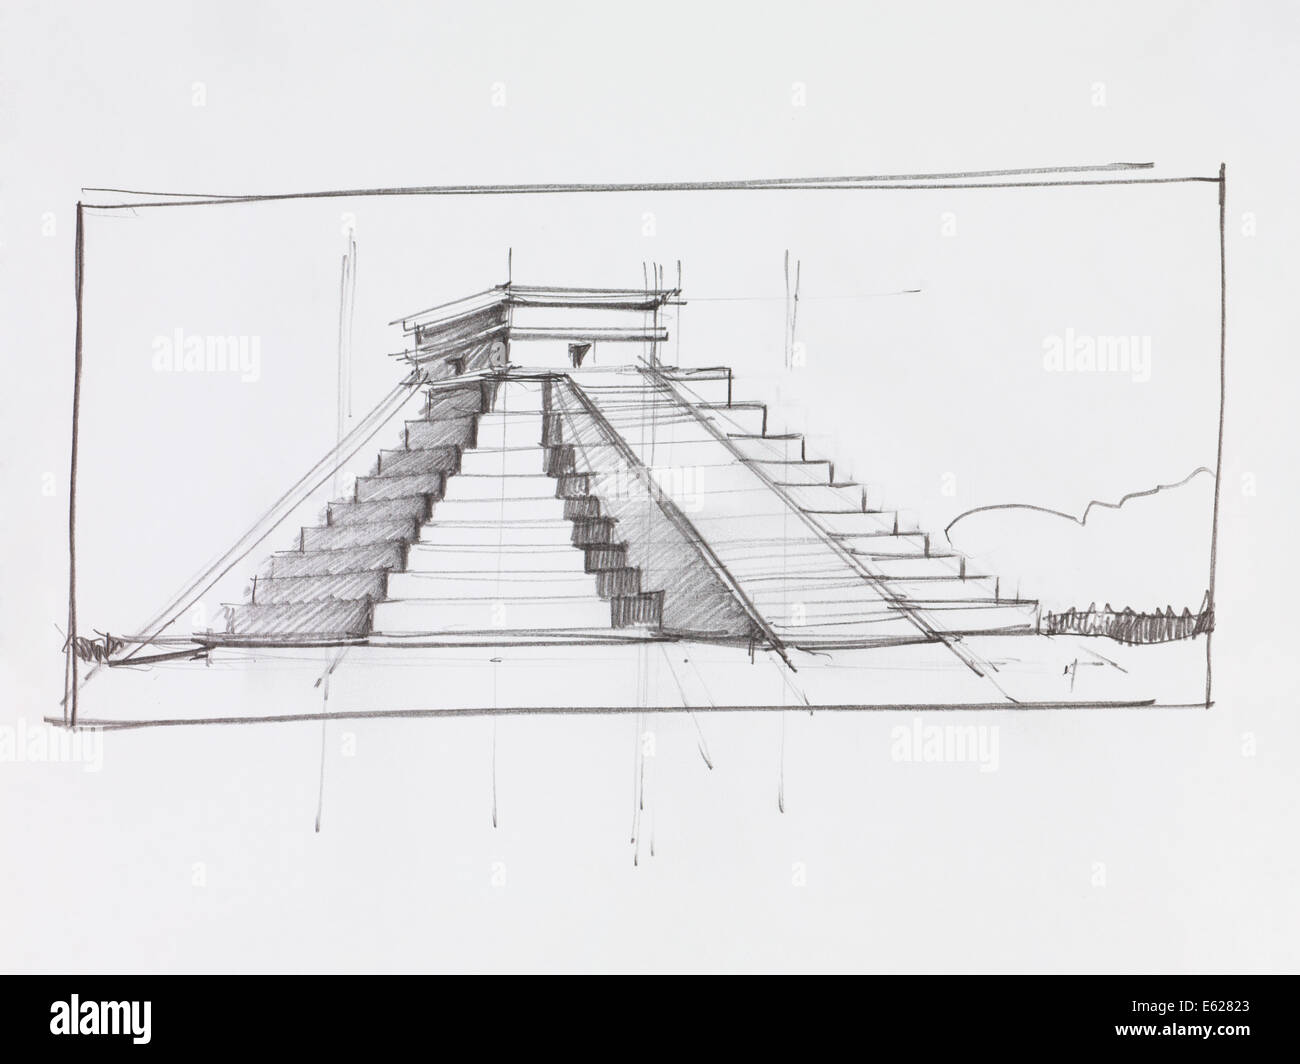 architectural perspective of Mayan pyramid of Kukulcan El Castillo in Chichen Itza, Mexico, drawn by hand Stock Photo